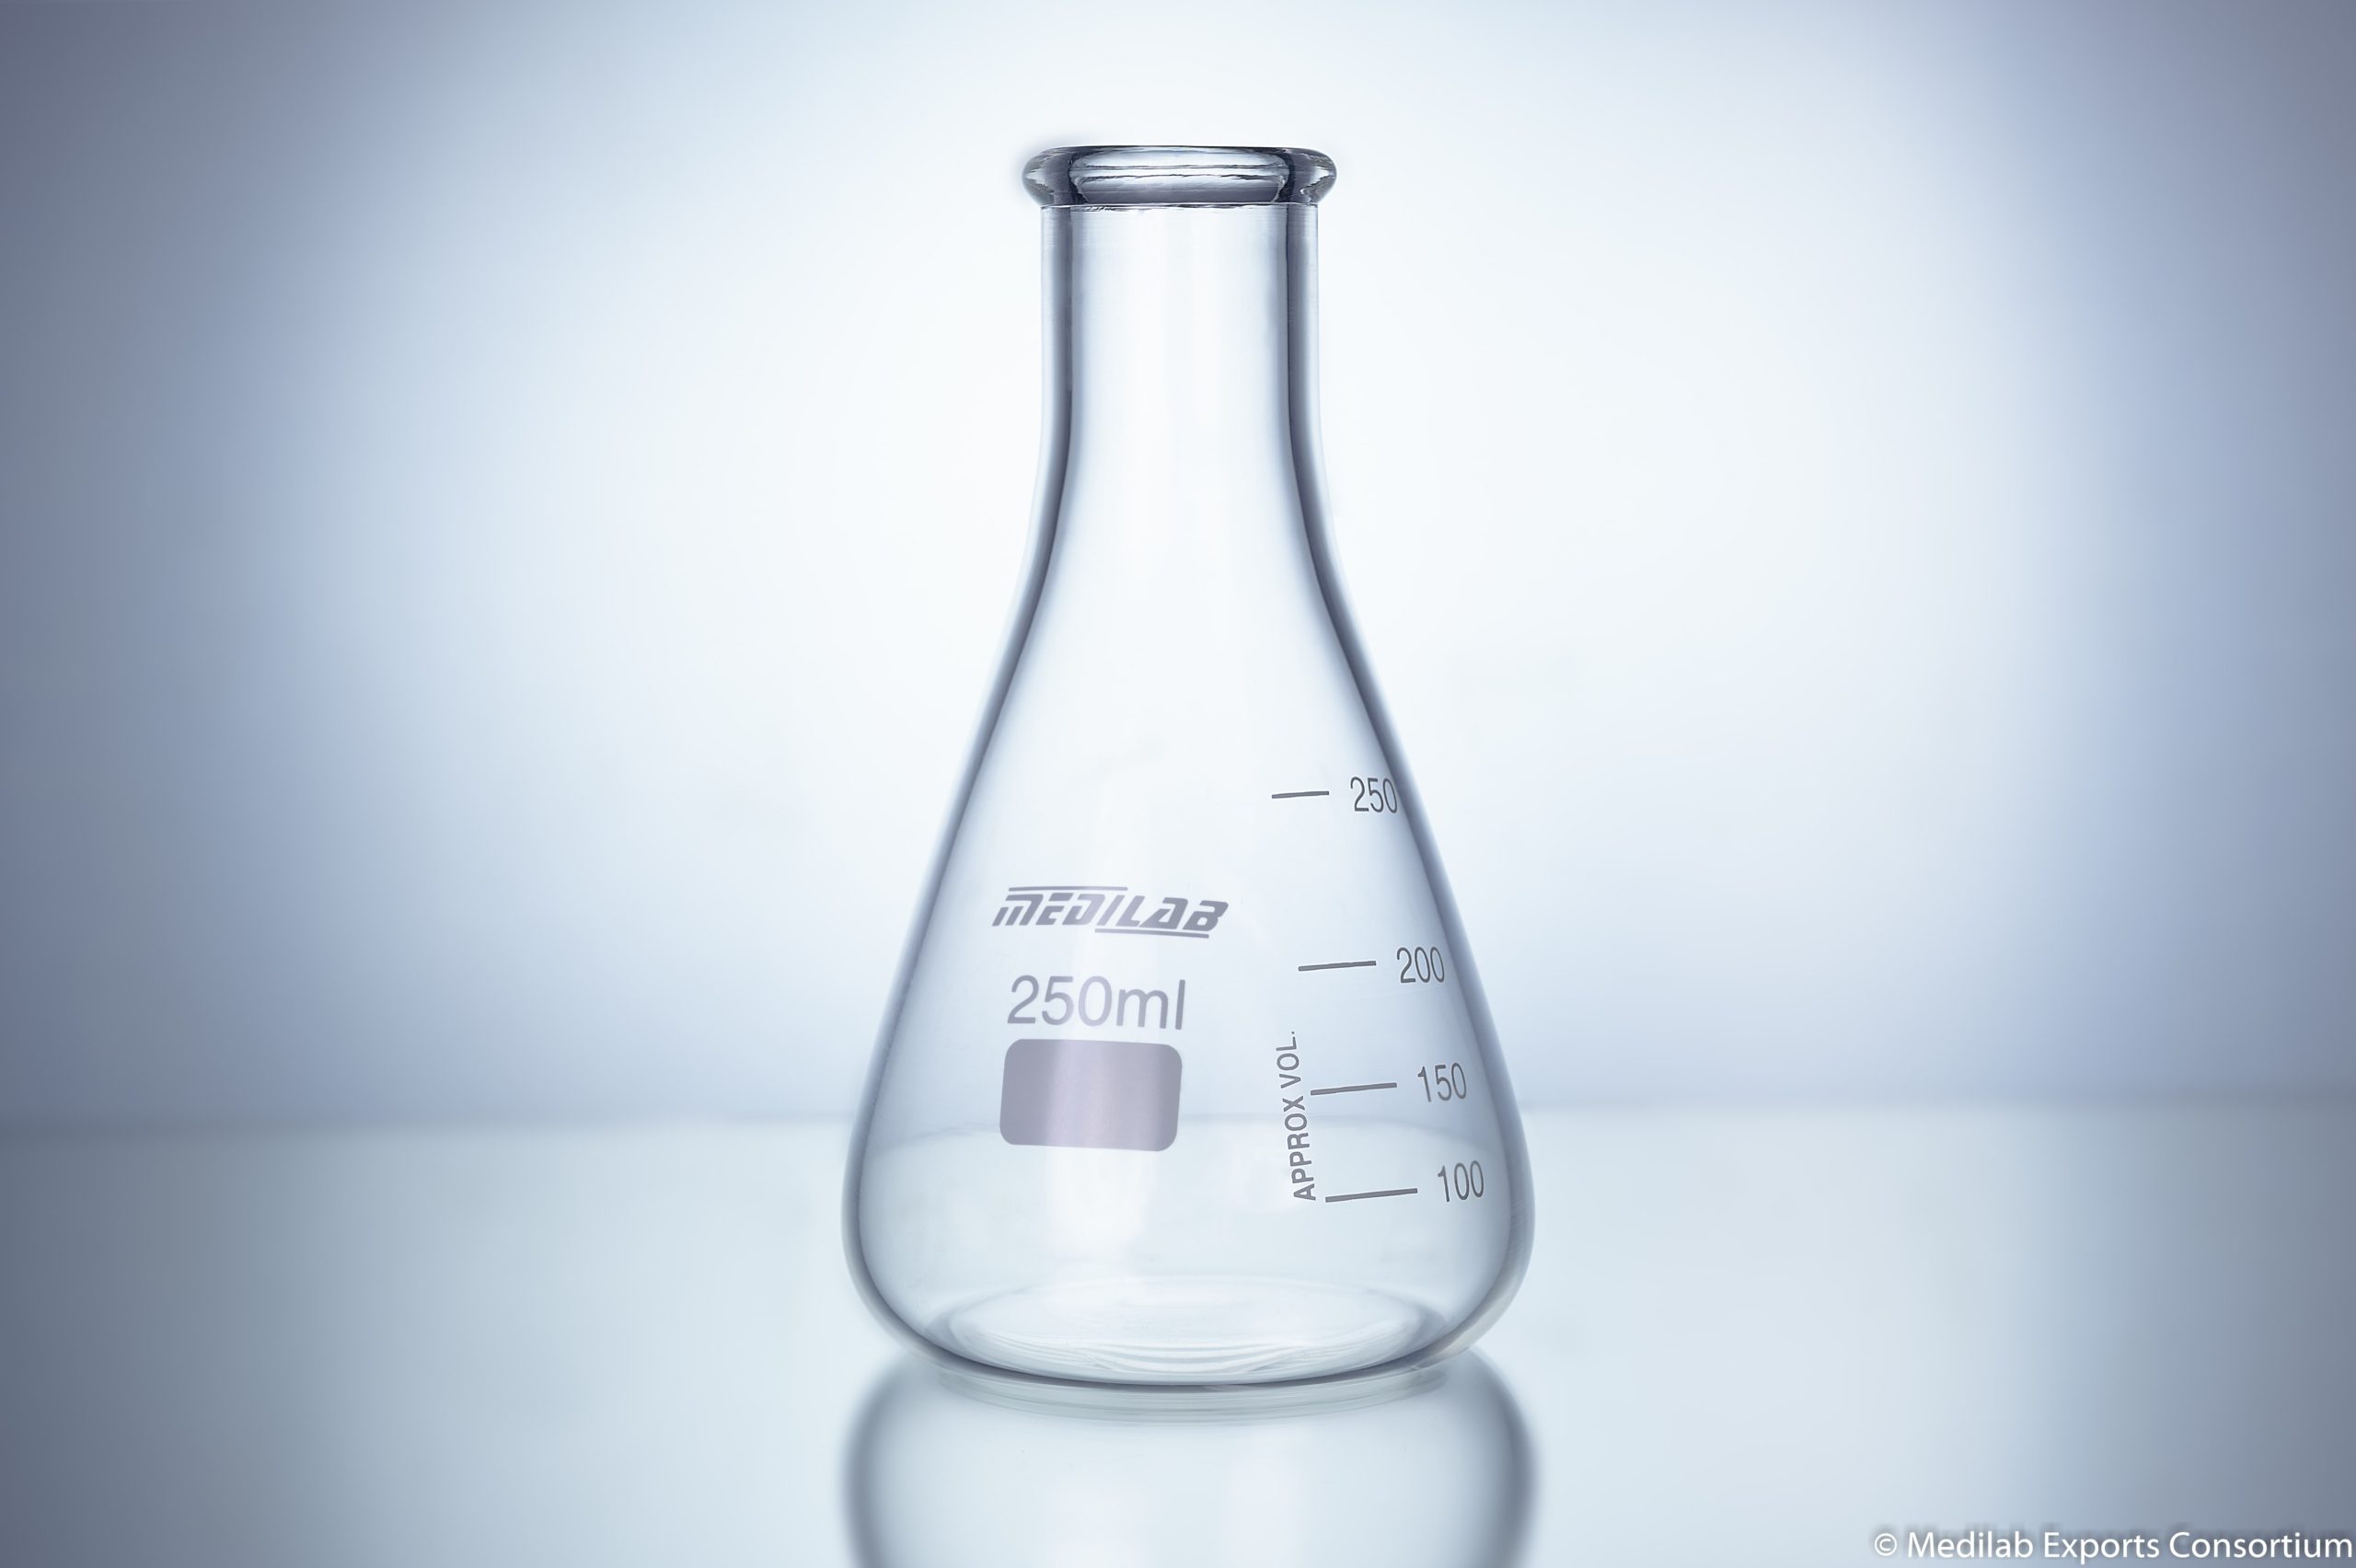 Conical Flask - labortary glassware manufacturer in India